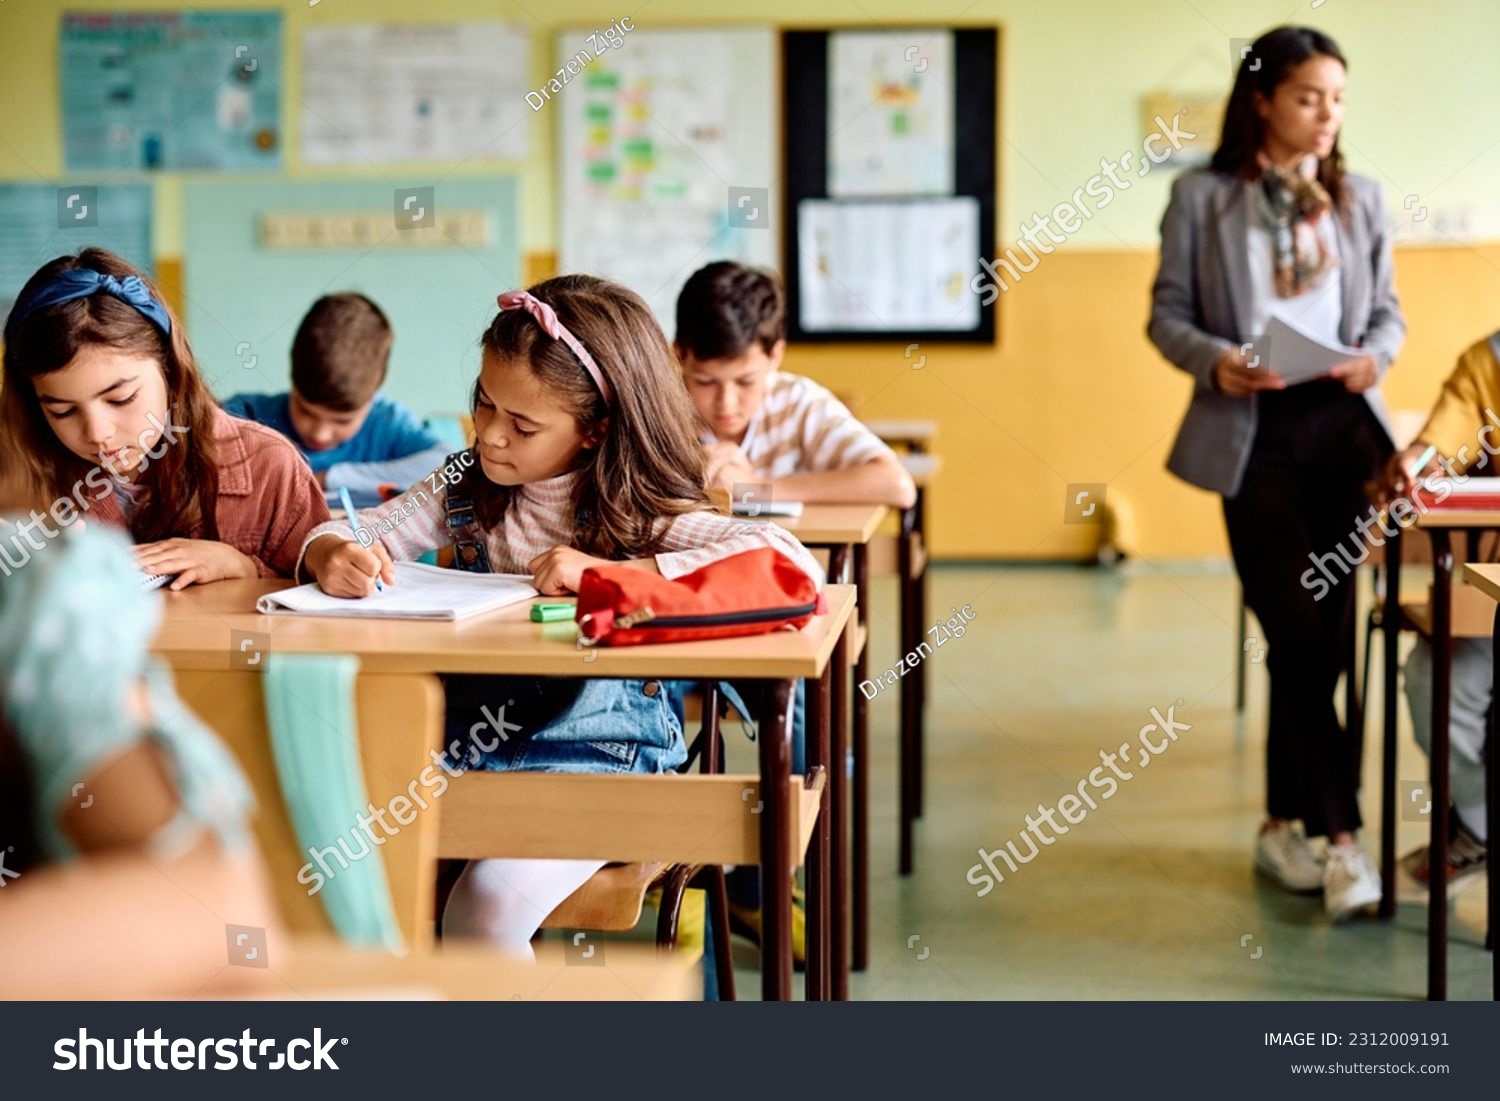 Group of elementary students having an exam at school. Focus is on Hispanic girl writing in her notebook. #2312009191